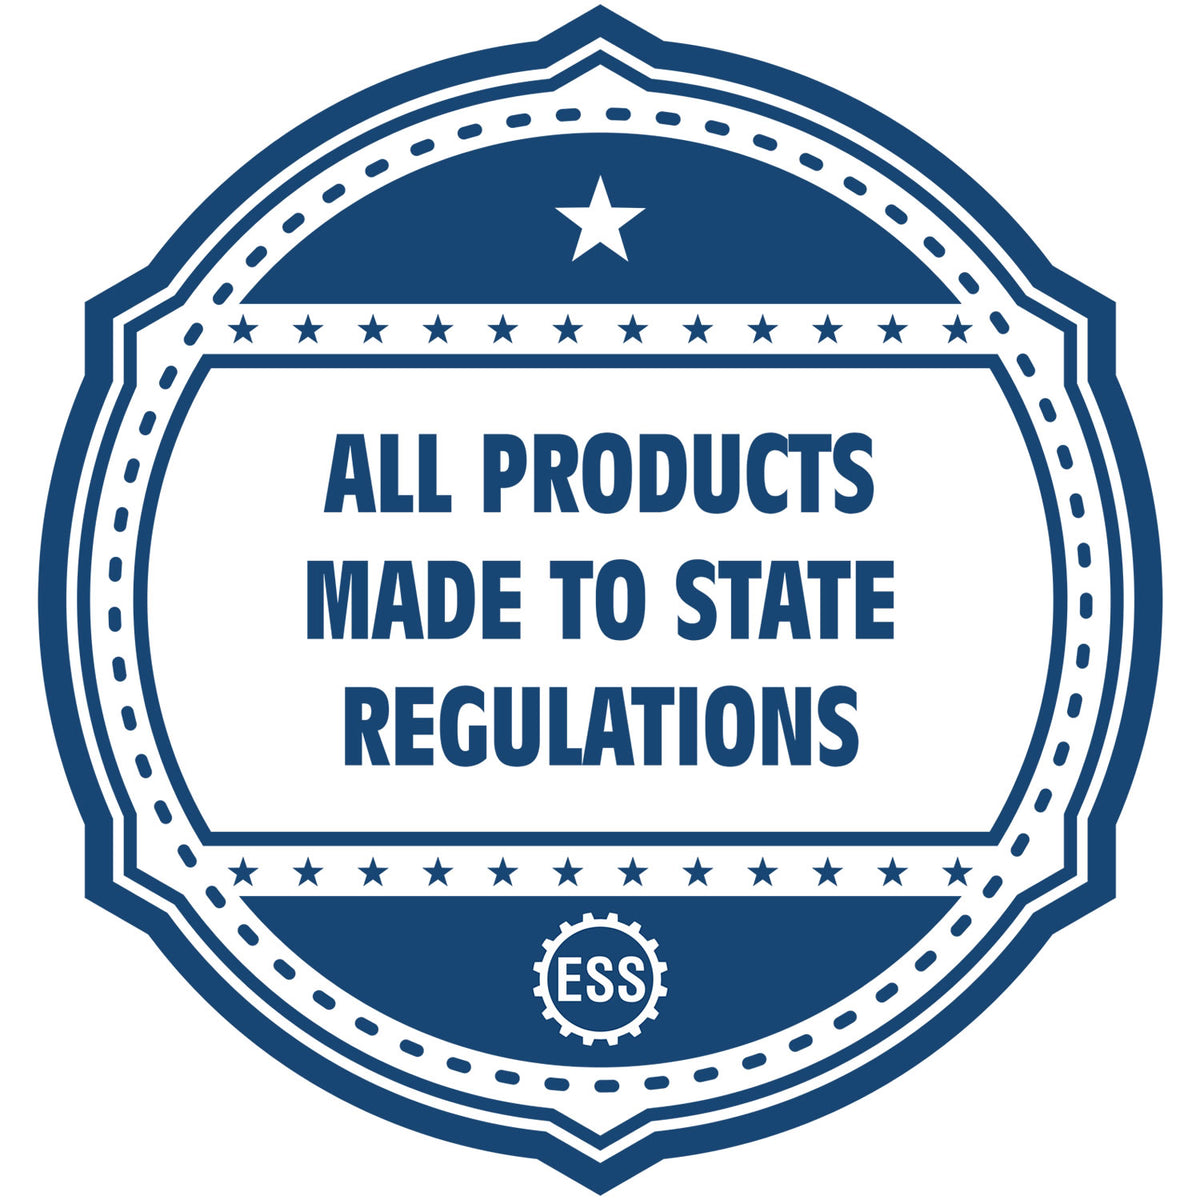 An icon or badge element for the Slim Pre-Inked State Seal Notary Stamp for New Mexico showing that this product is made in compliance with state regulations.